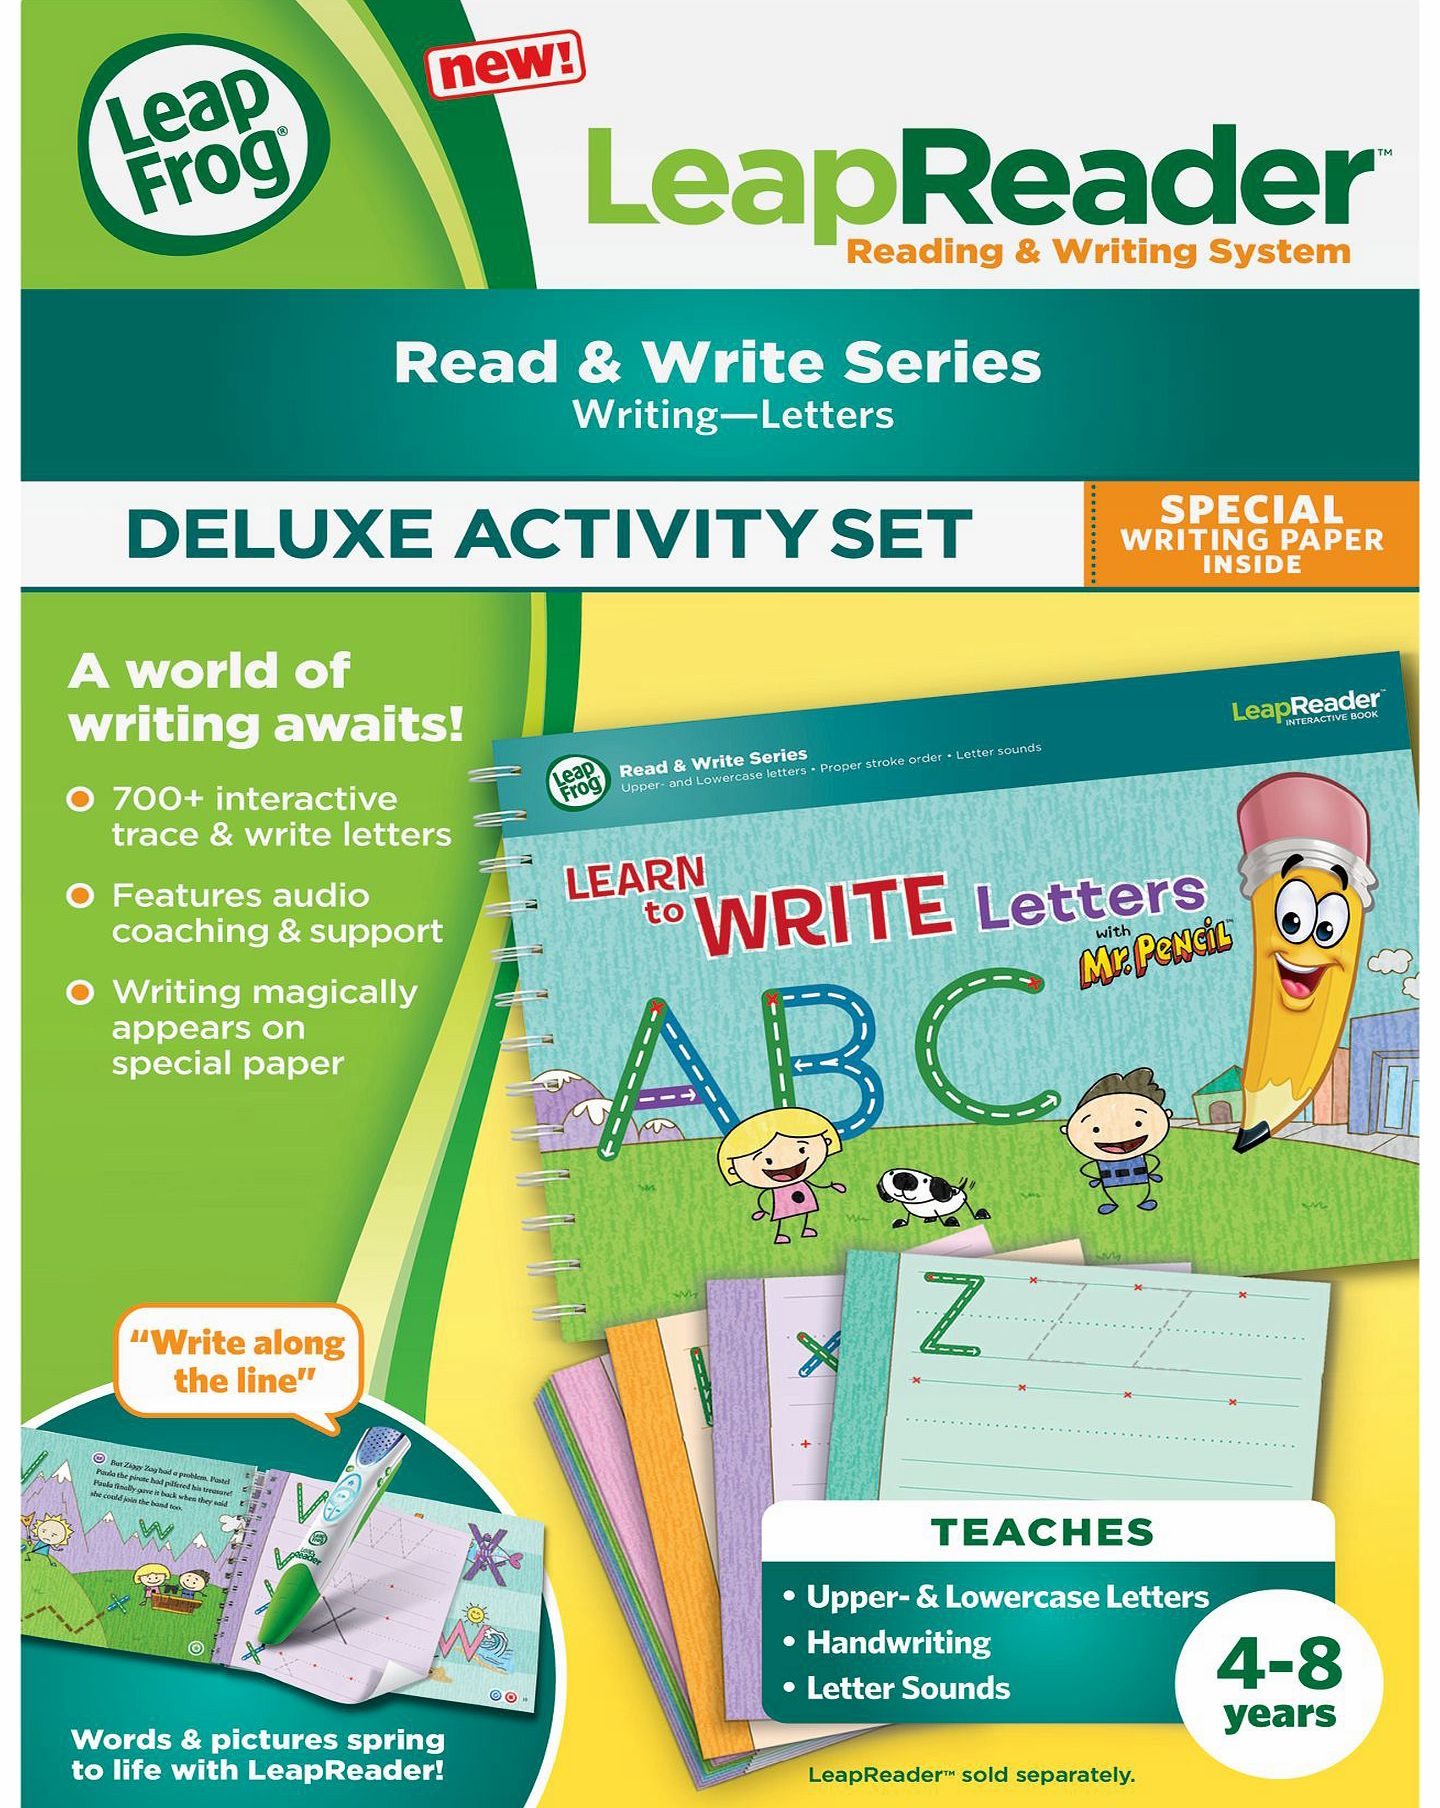 LeapReader Book - Learn to Write Letters with Mr